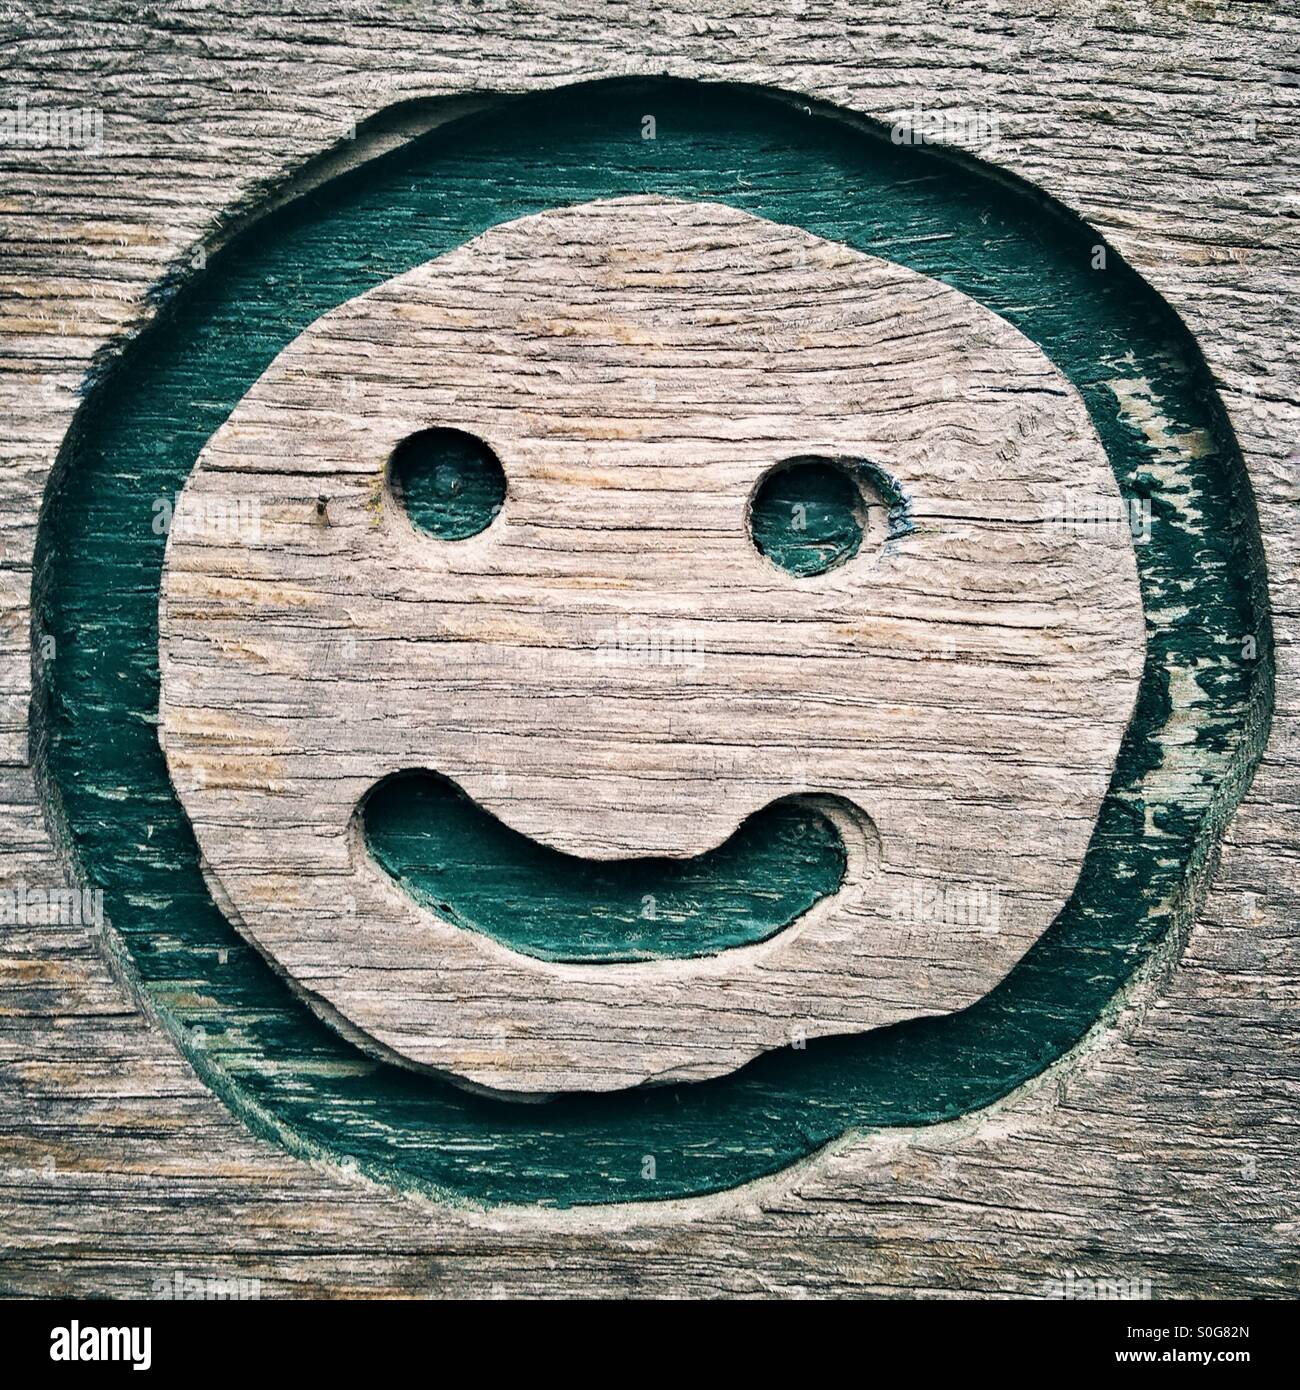 Smiley Face Carved in Wood Stock Photo